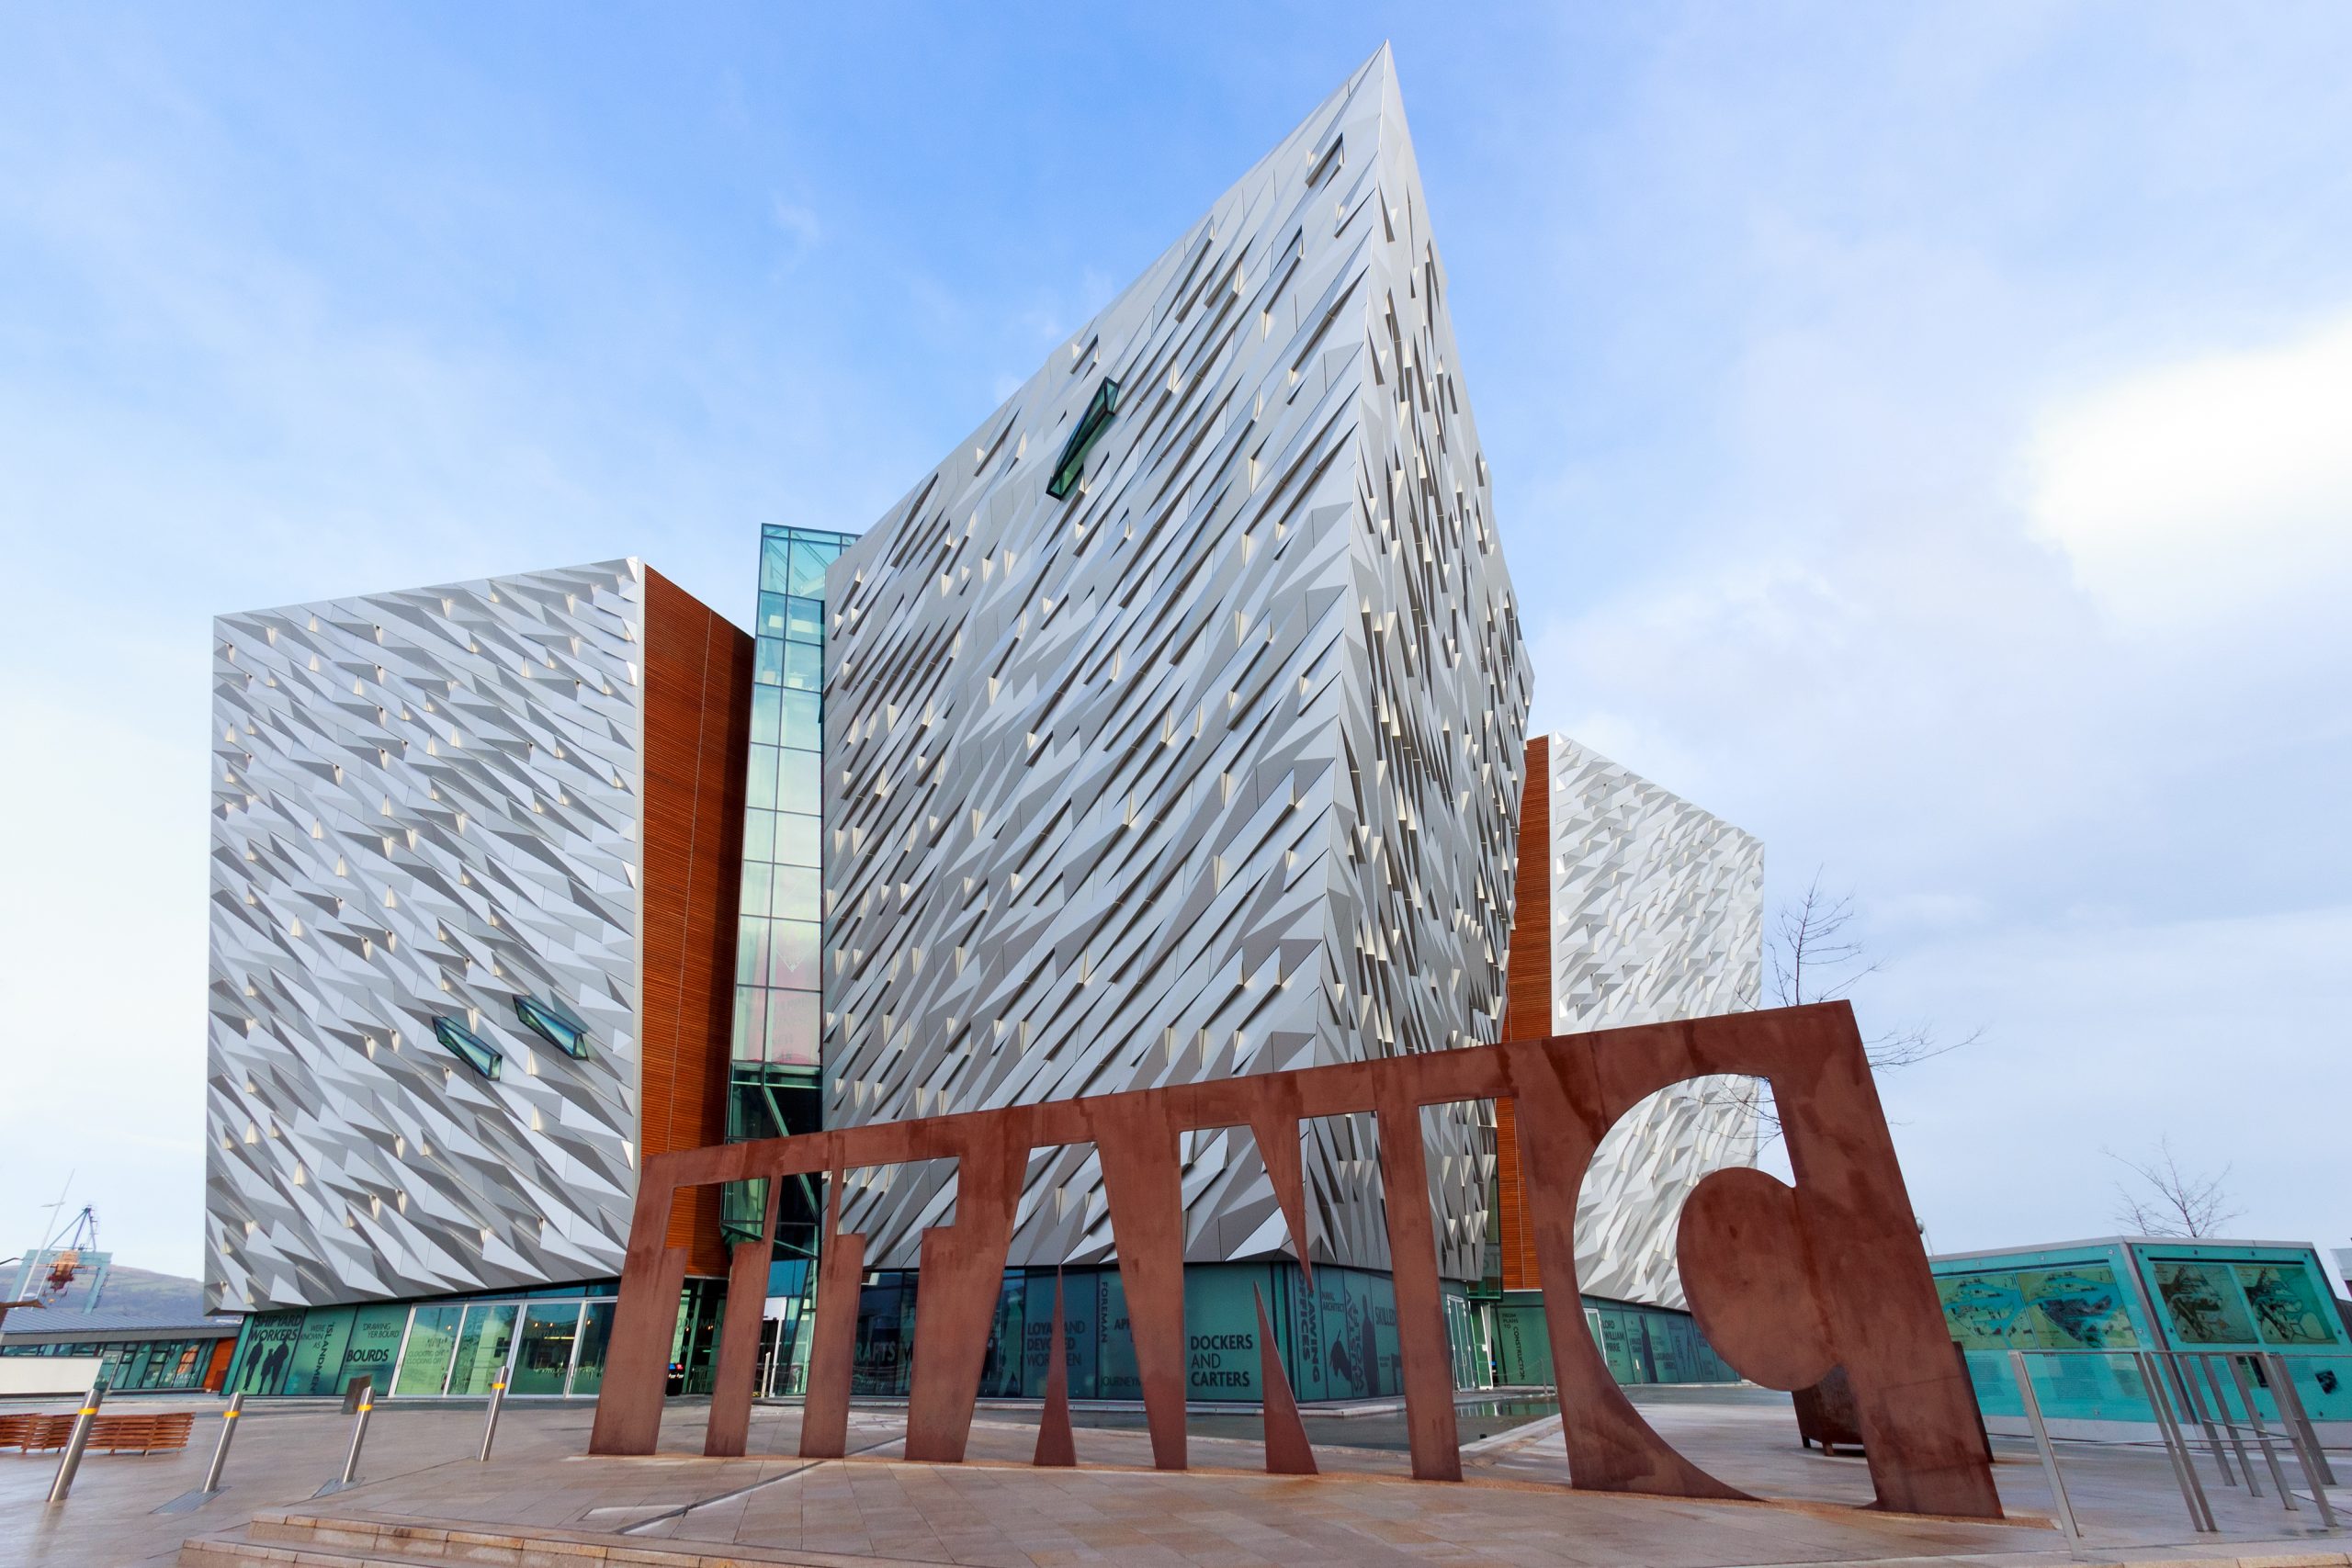 75 Jobs at risk at Titanic Belfast visitor centre